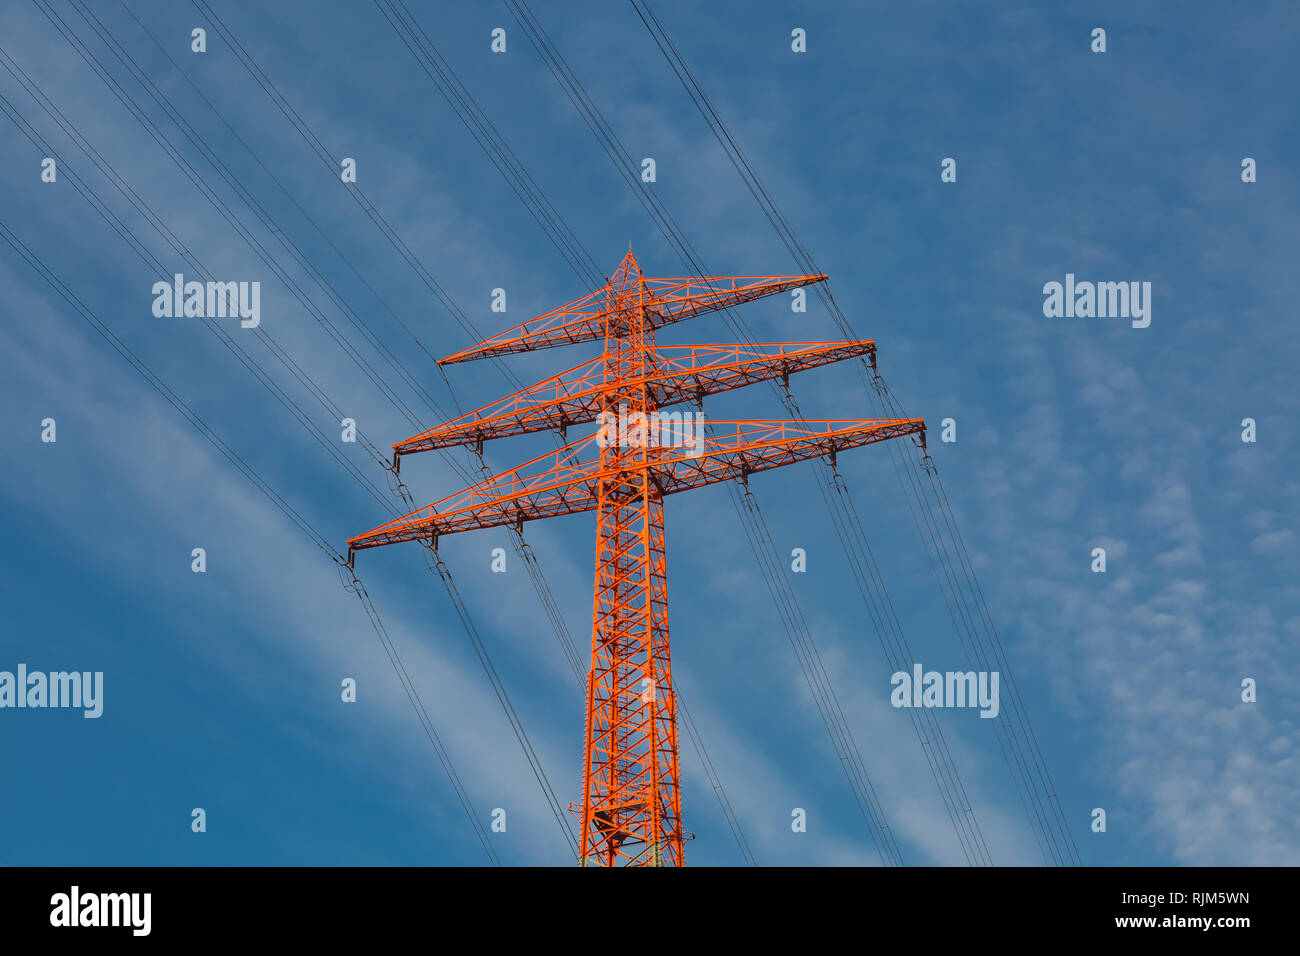 Transmission tower with power lines Stock Photo